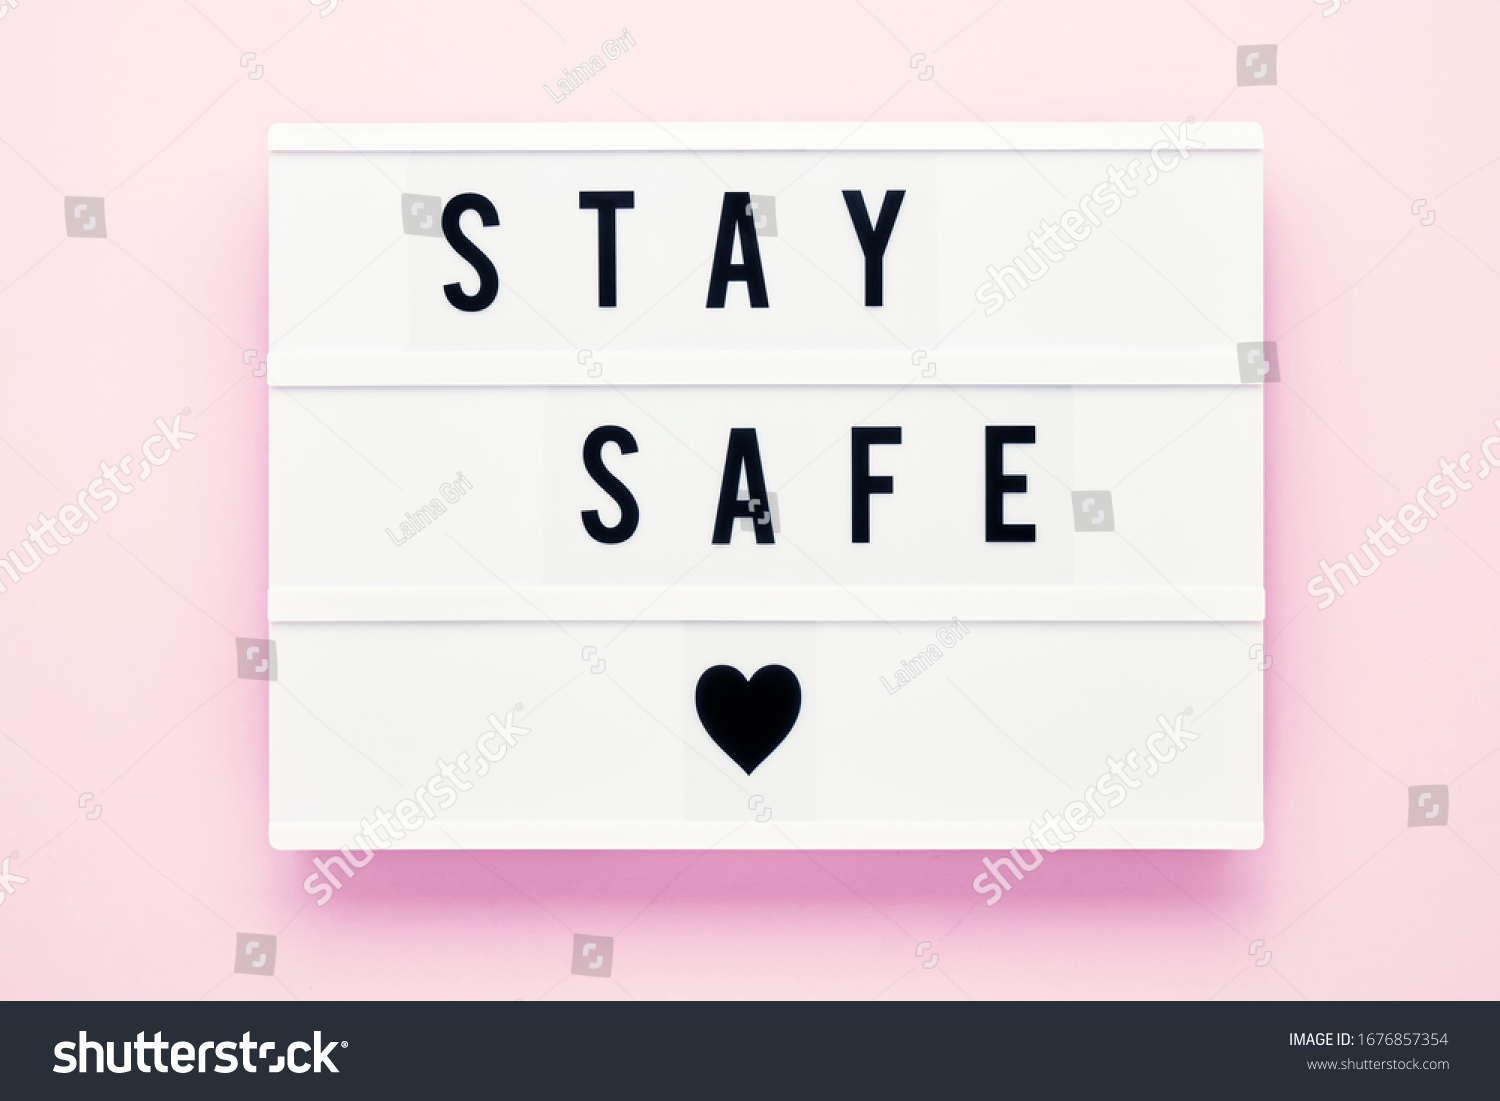 STAY SAFE written in light box on pink background. Healthcare and medical concept. Top view, copy space. Quarantine concept. #1676857354